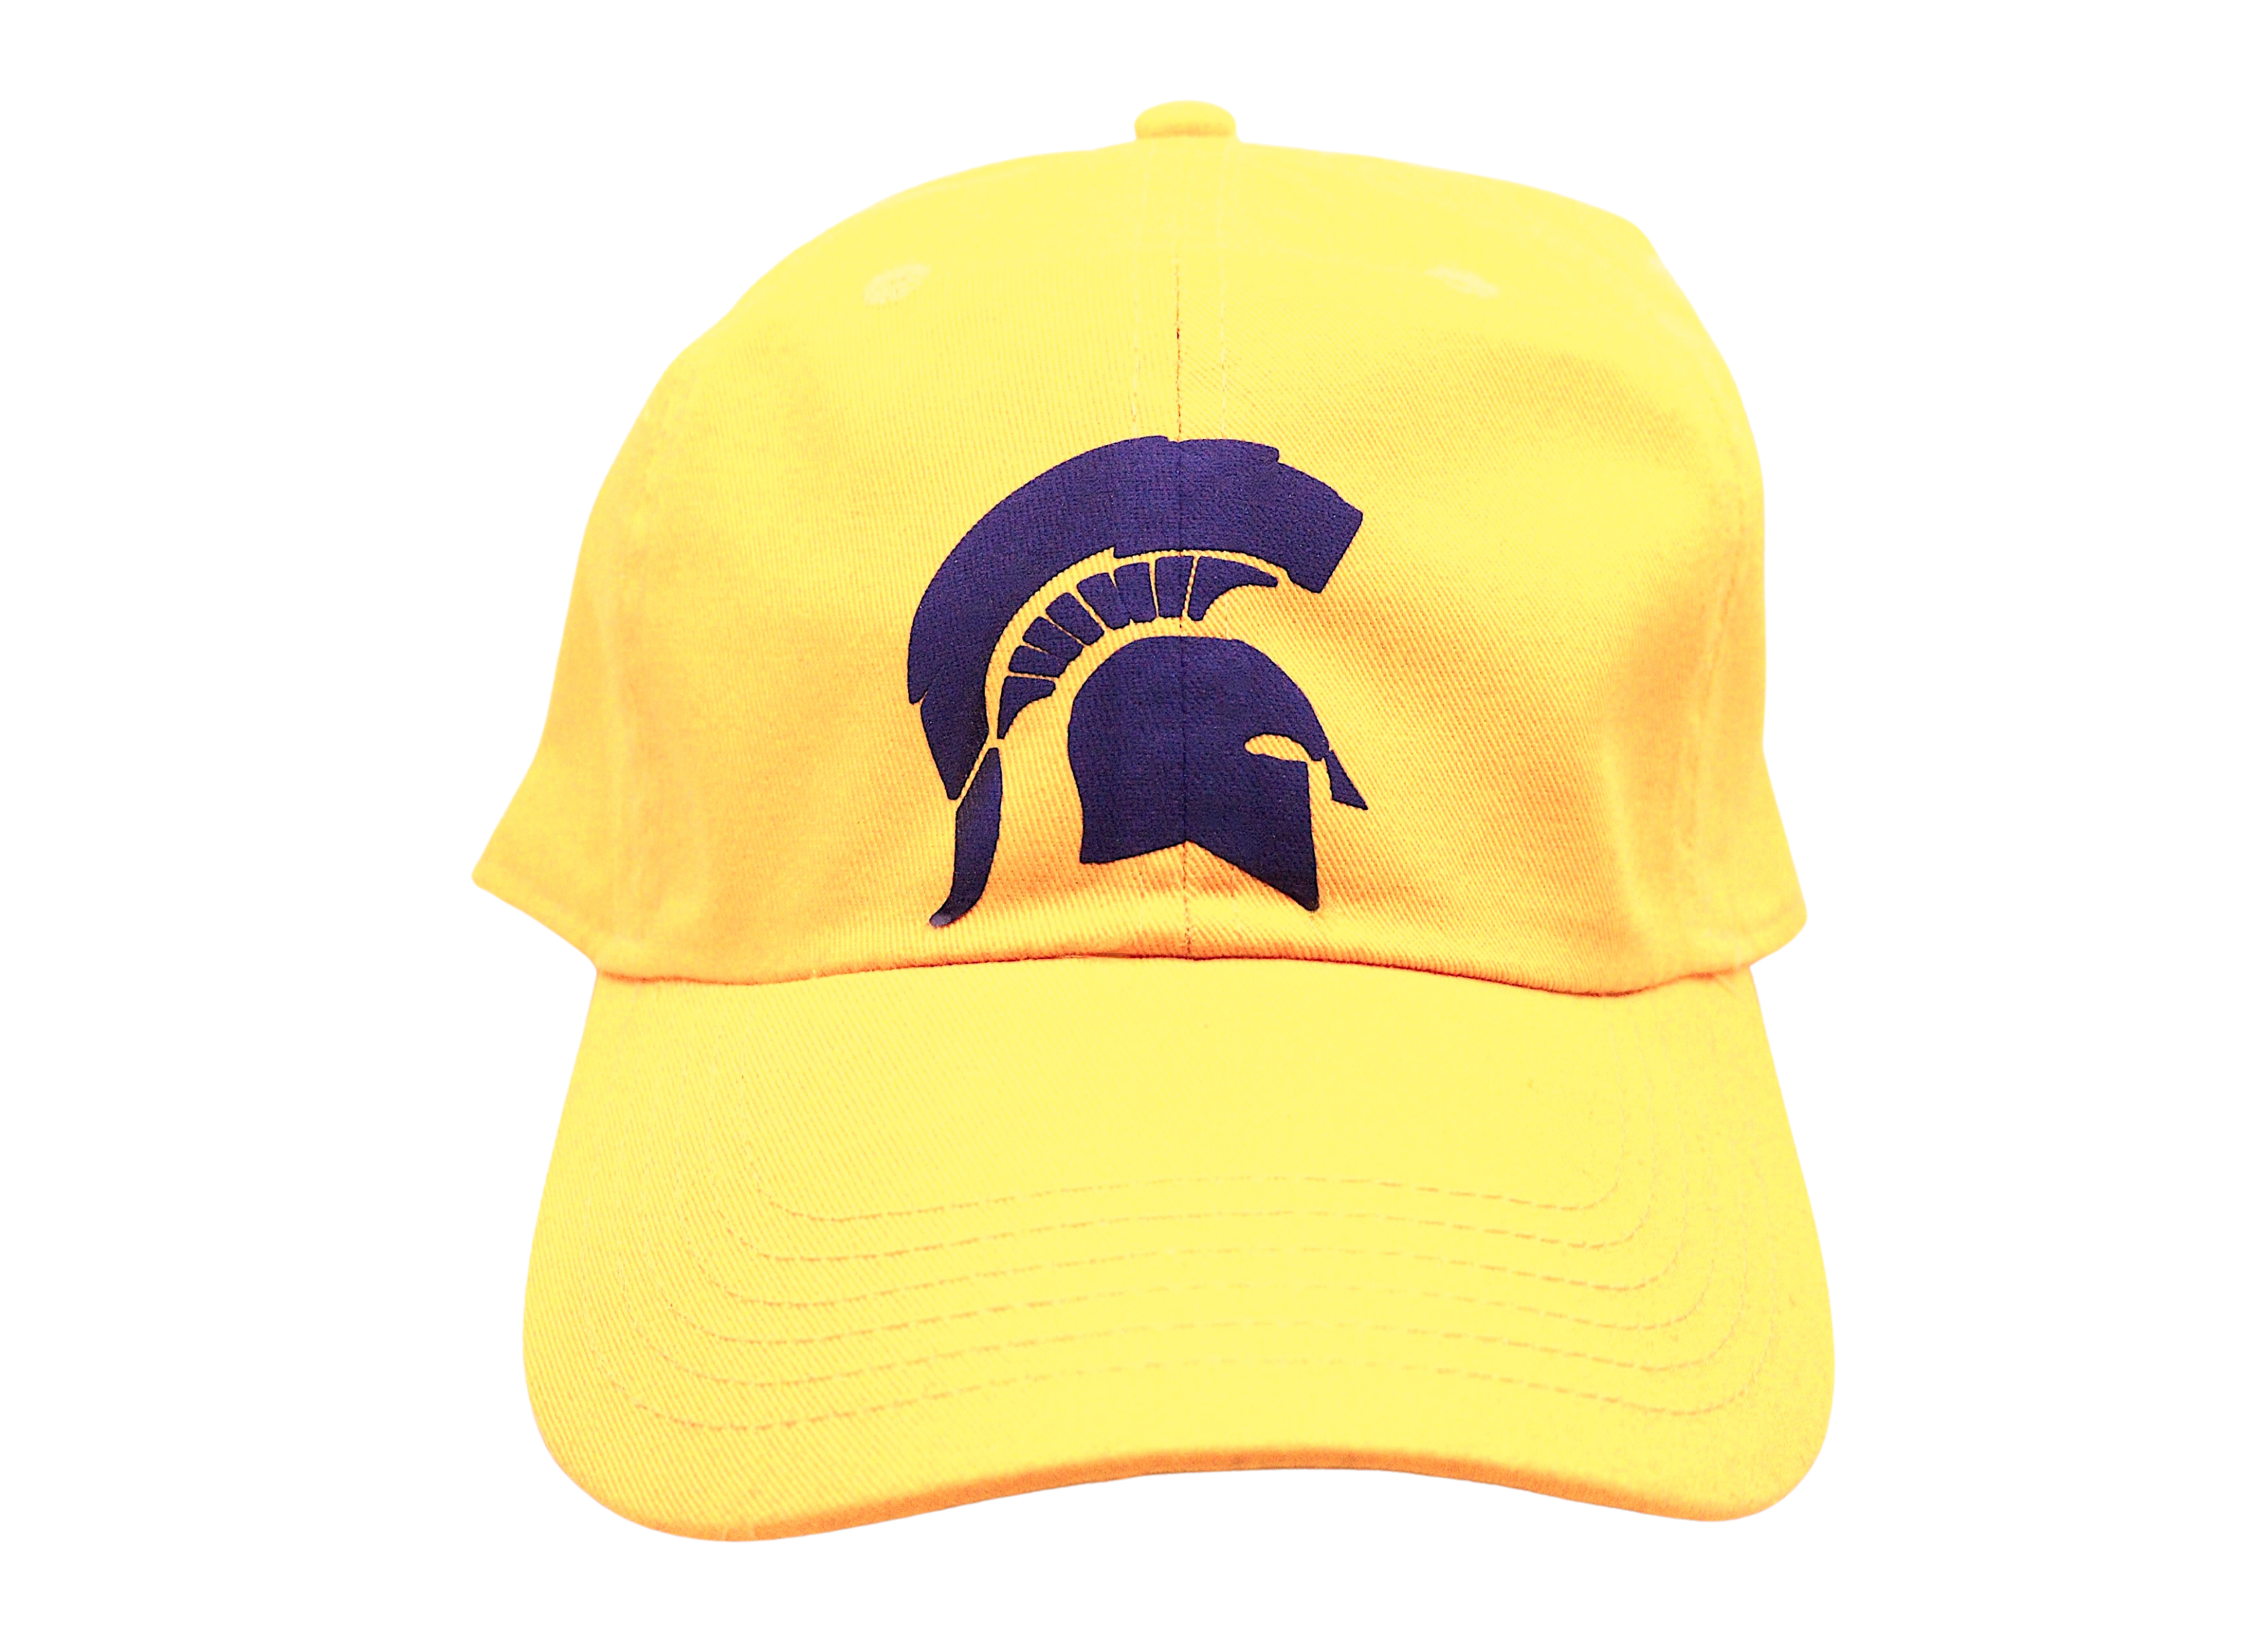 MOUNT TABOR "PUFF" DAD HAT (YELLOW & NAVY BLUE)